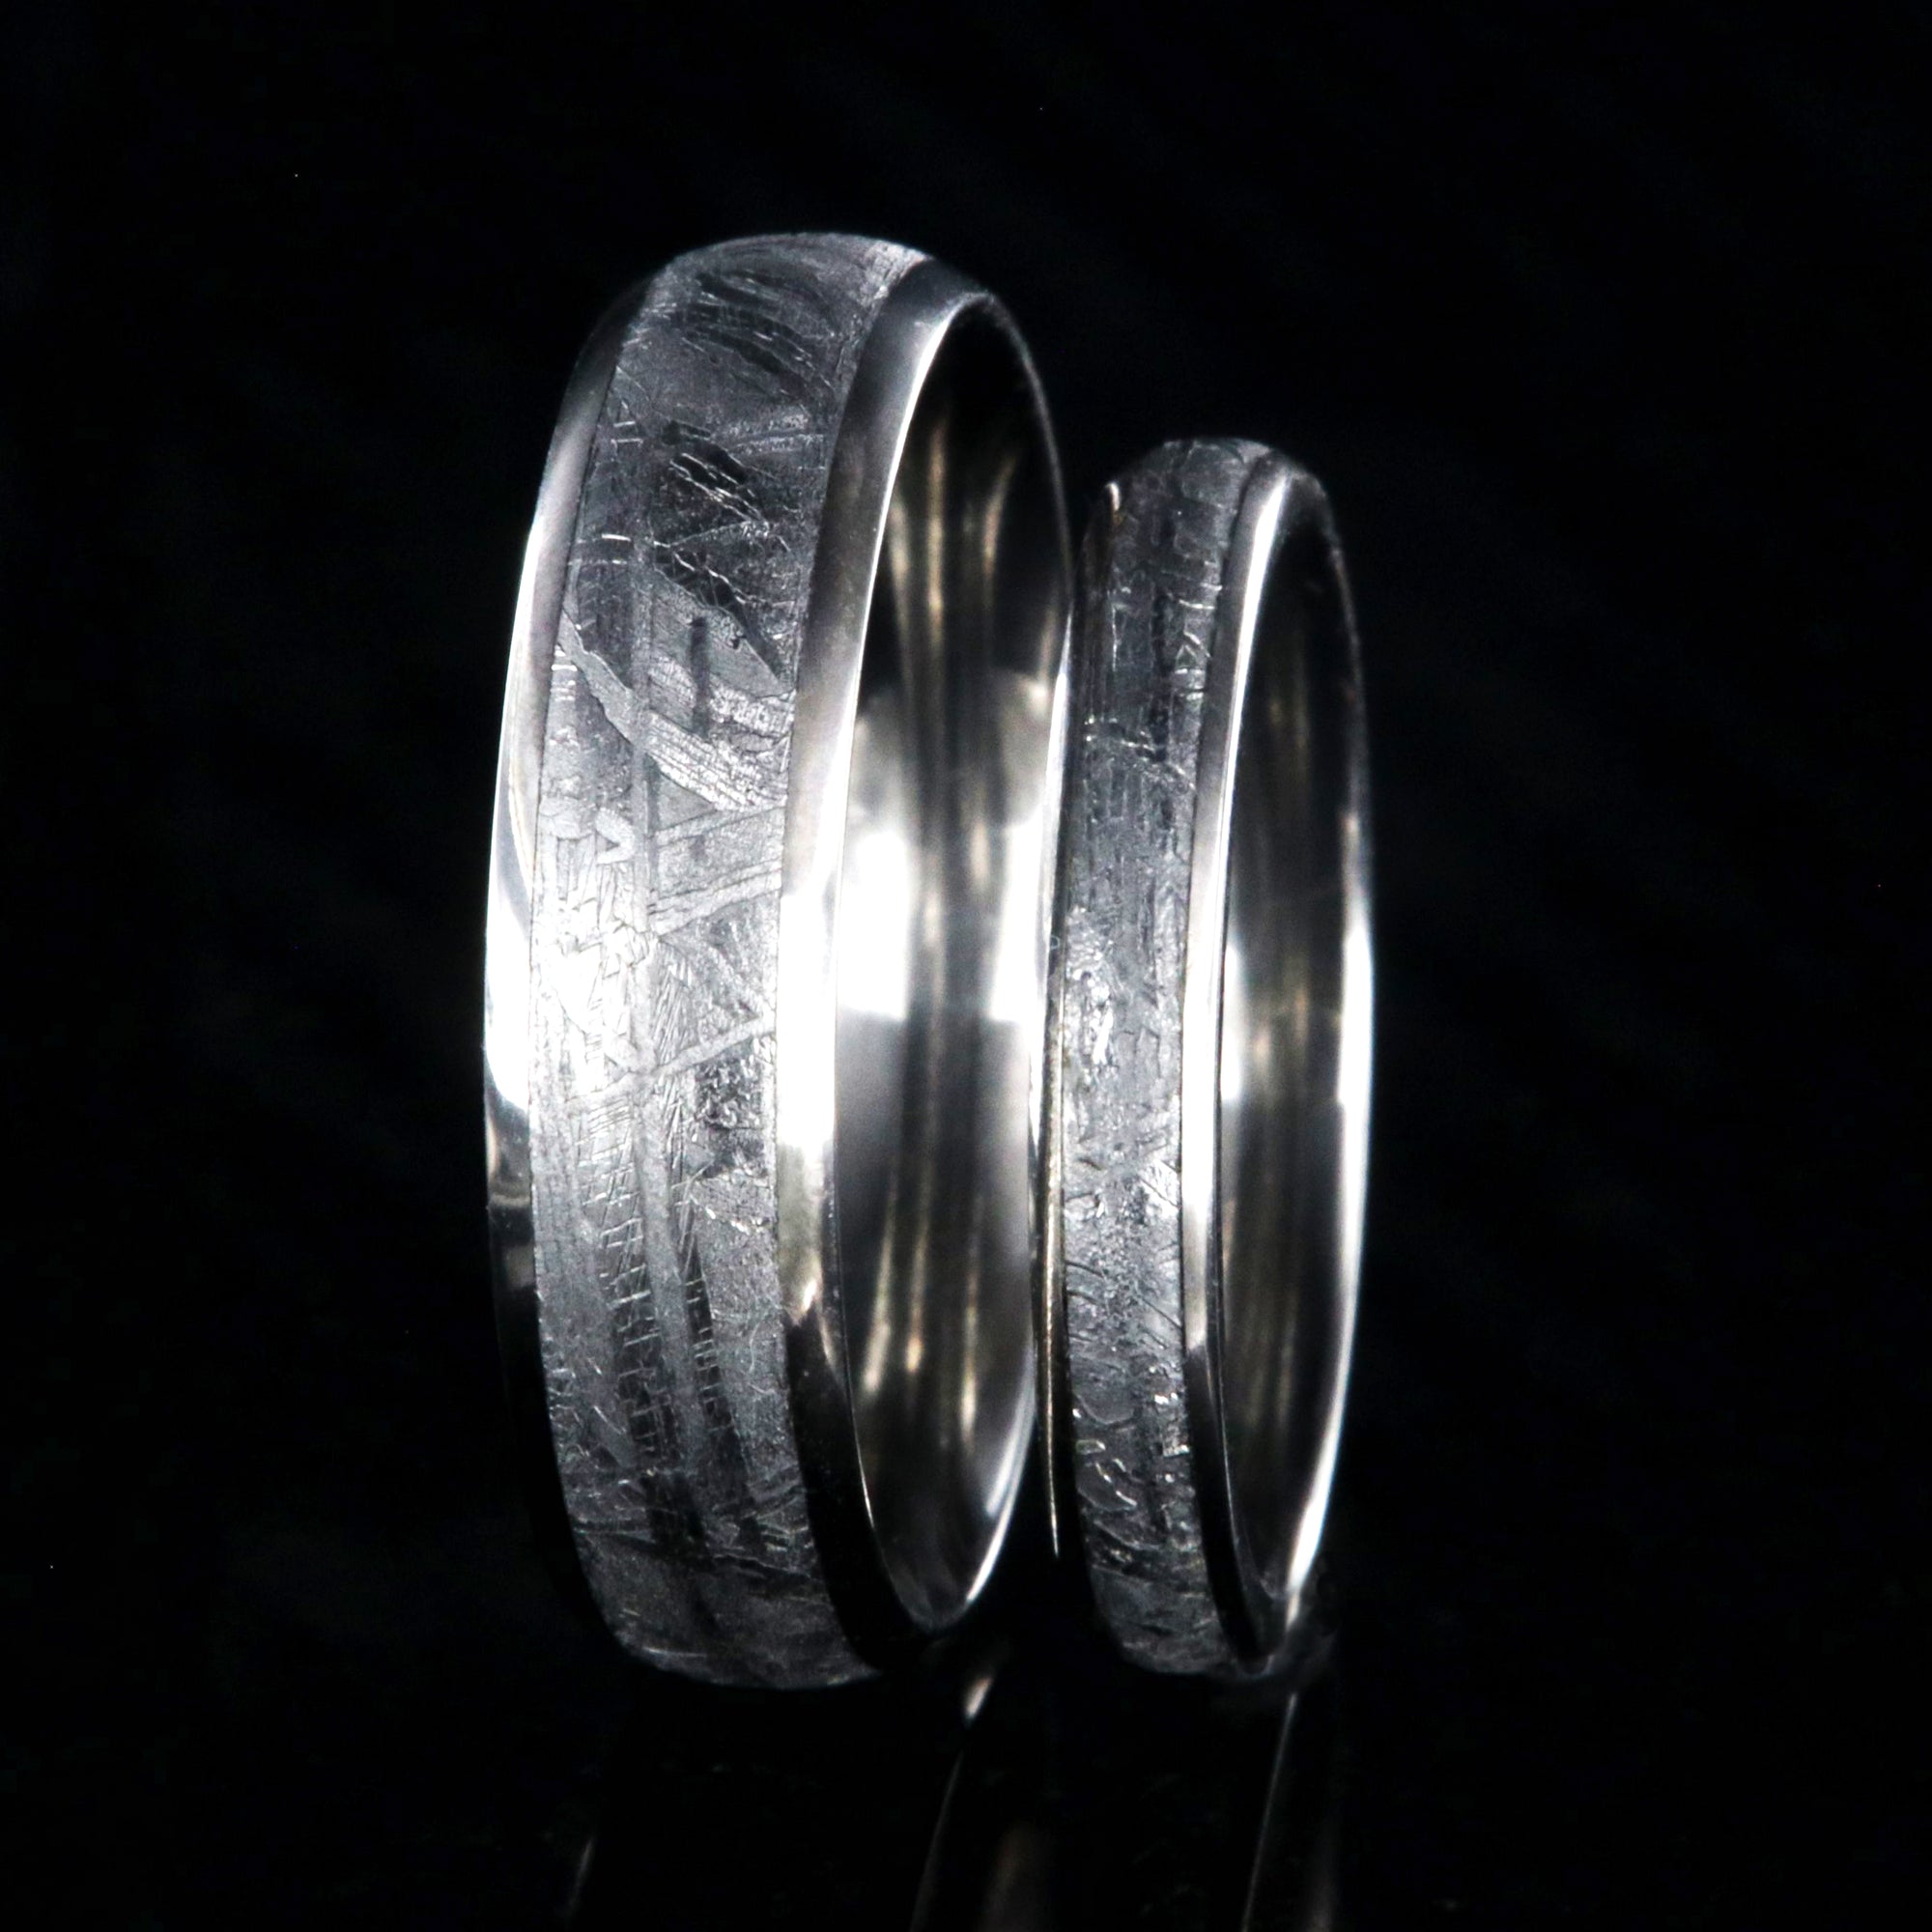 6mm and 3mm wide matching meteorite wedding band set, rounded profile with titanium edges and sleeve